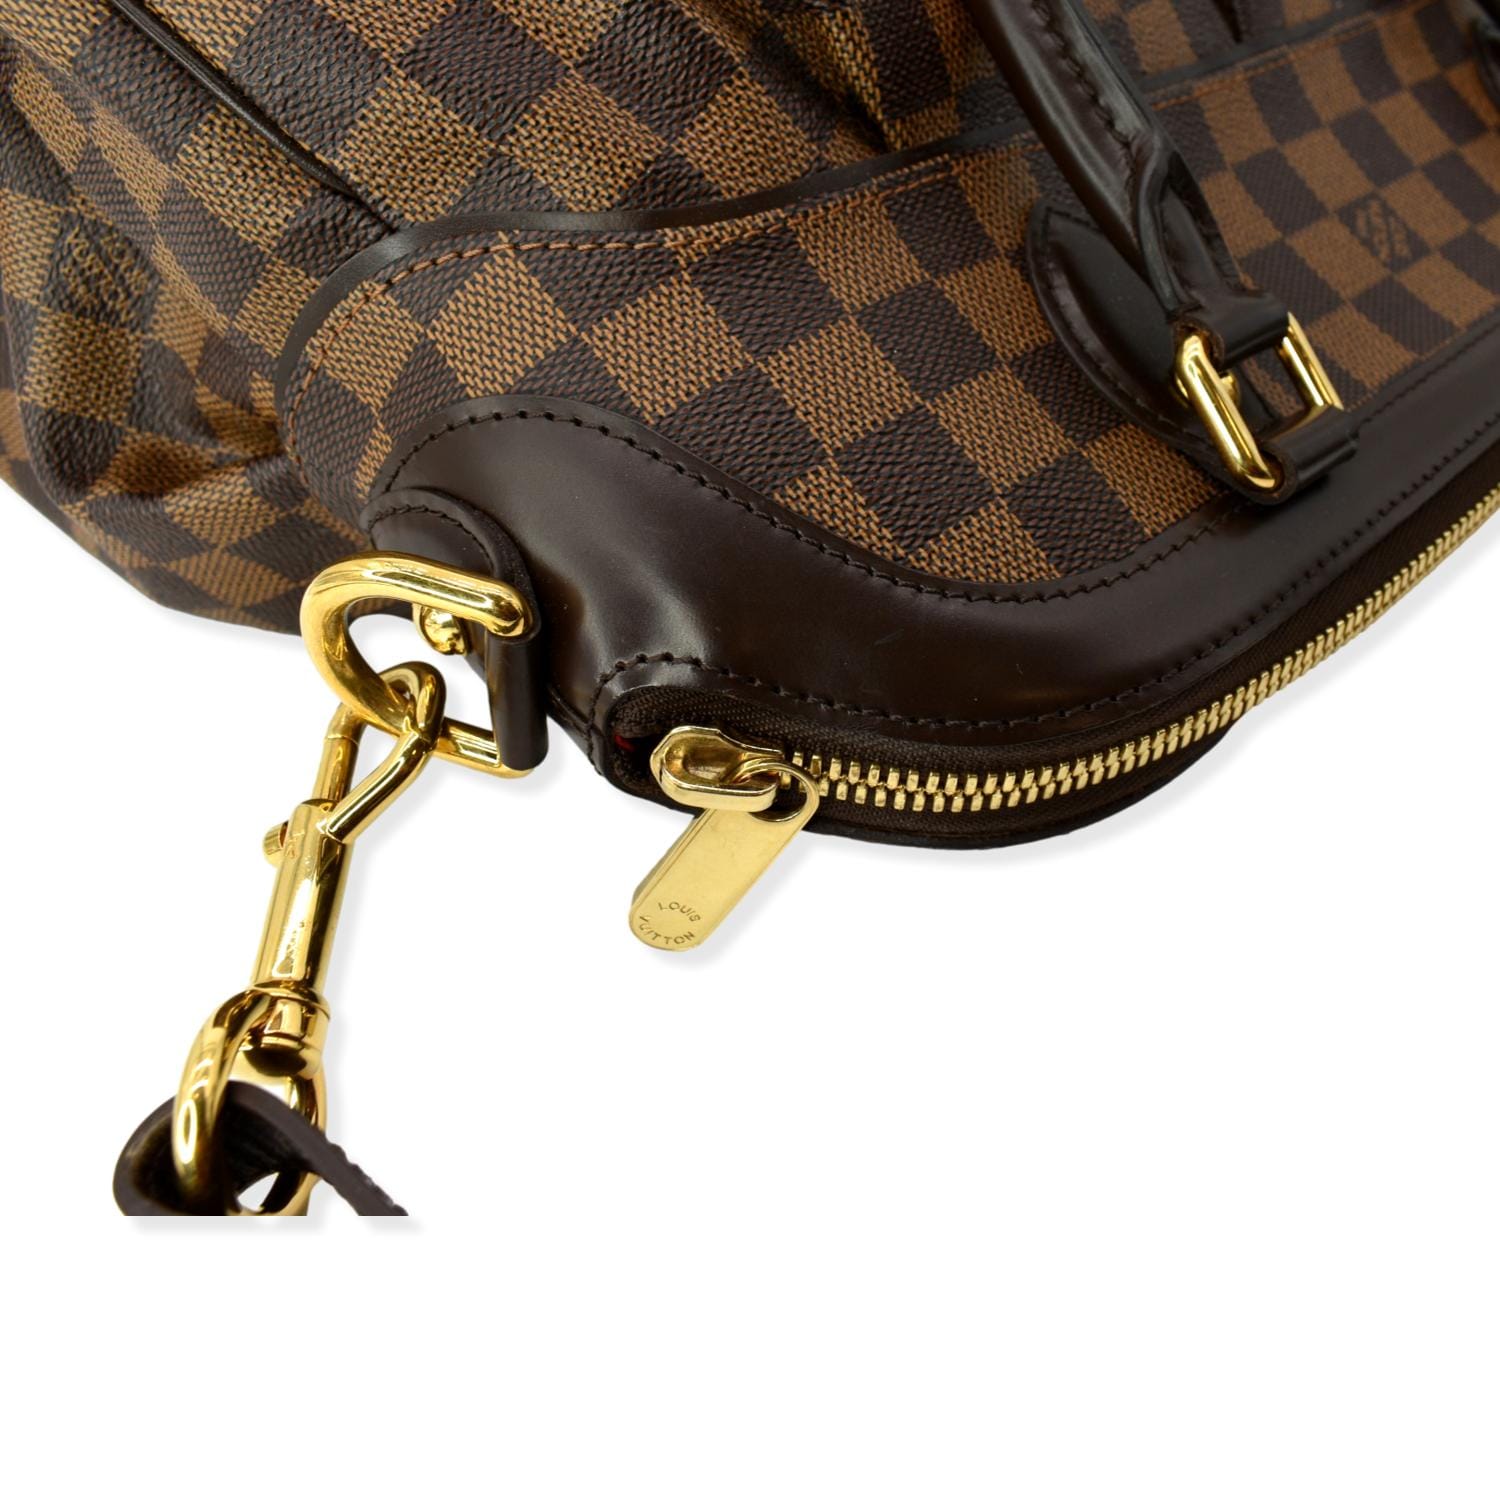 Trevi leather handbag Louis Vuitton Brown in Leather - 30861442